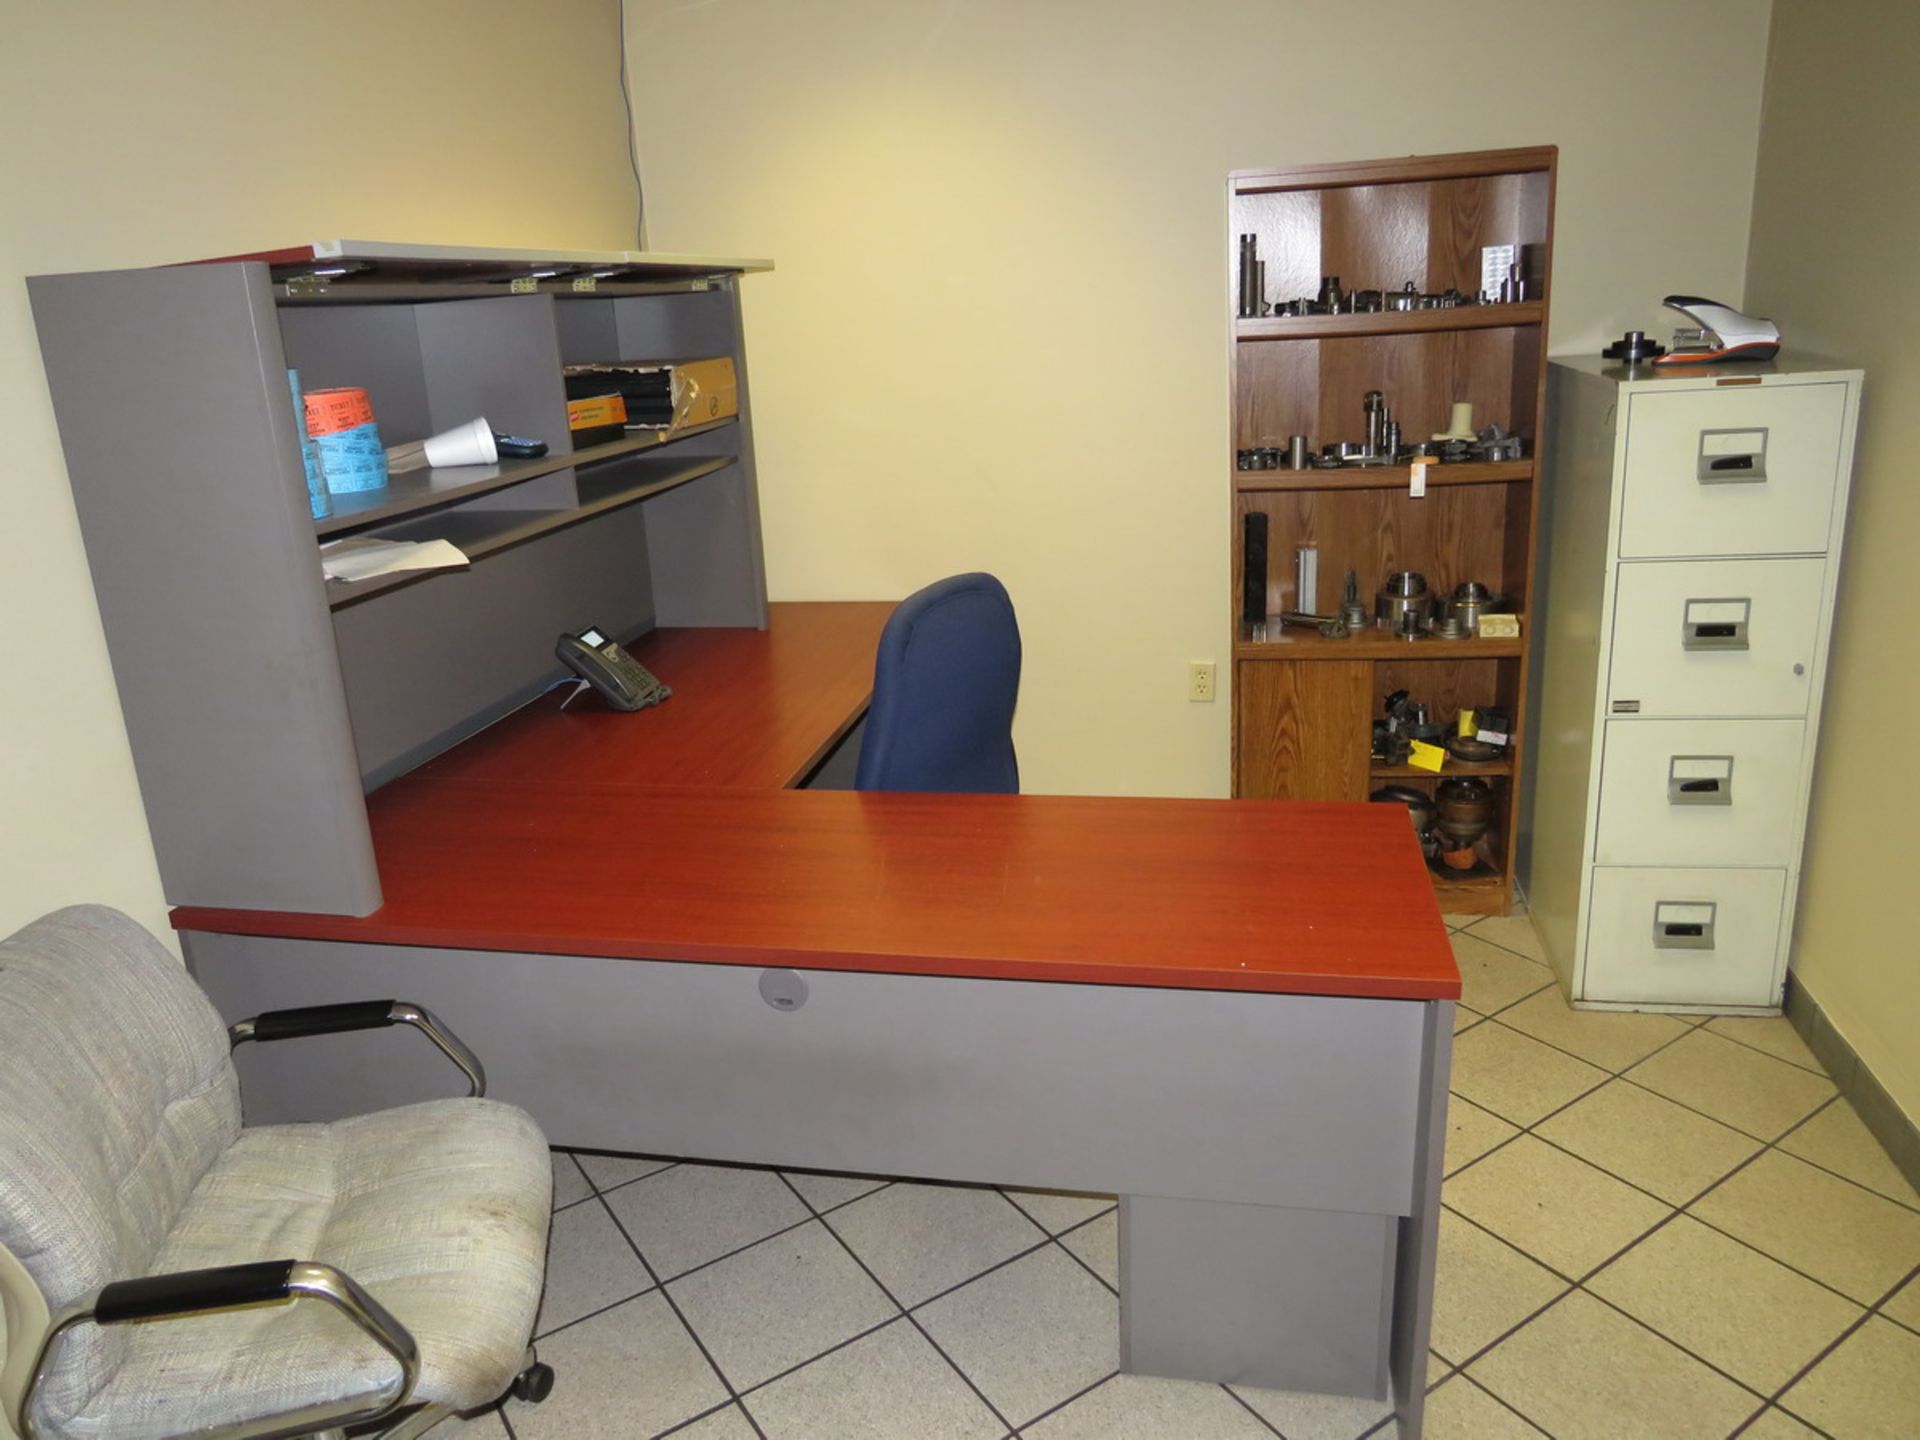 Contents of Office to Include: L-Shaped Desk, Bookshelf, 4-Drawer Metal Vertical Filing Cabinet,